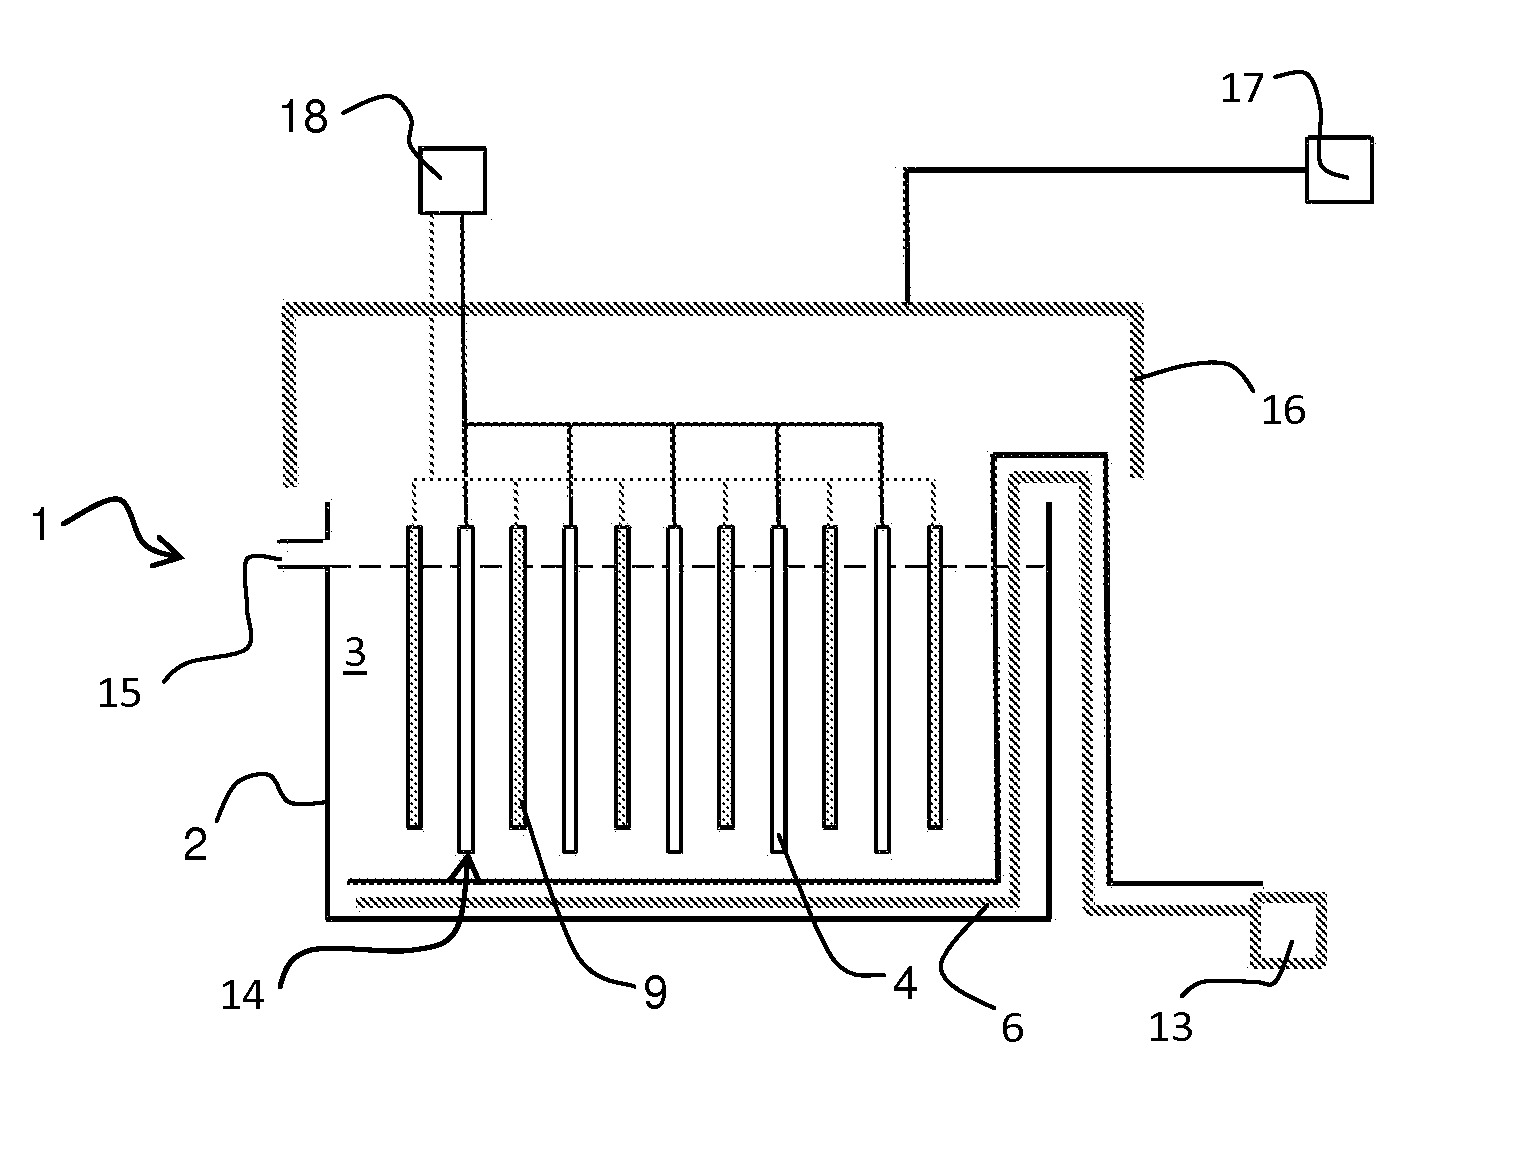 Equipment and method for electrolytic recovery of metal